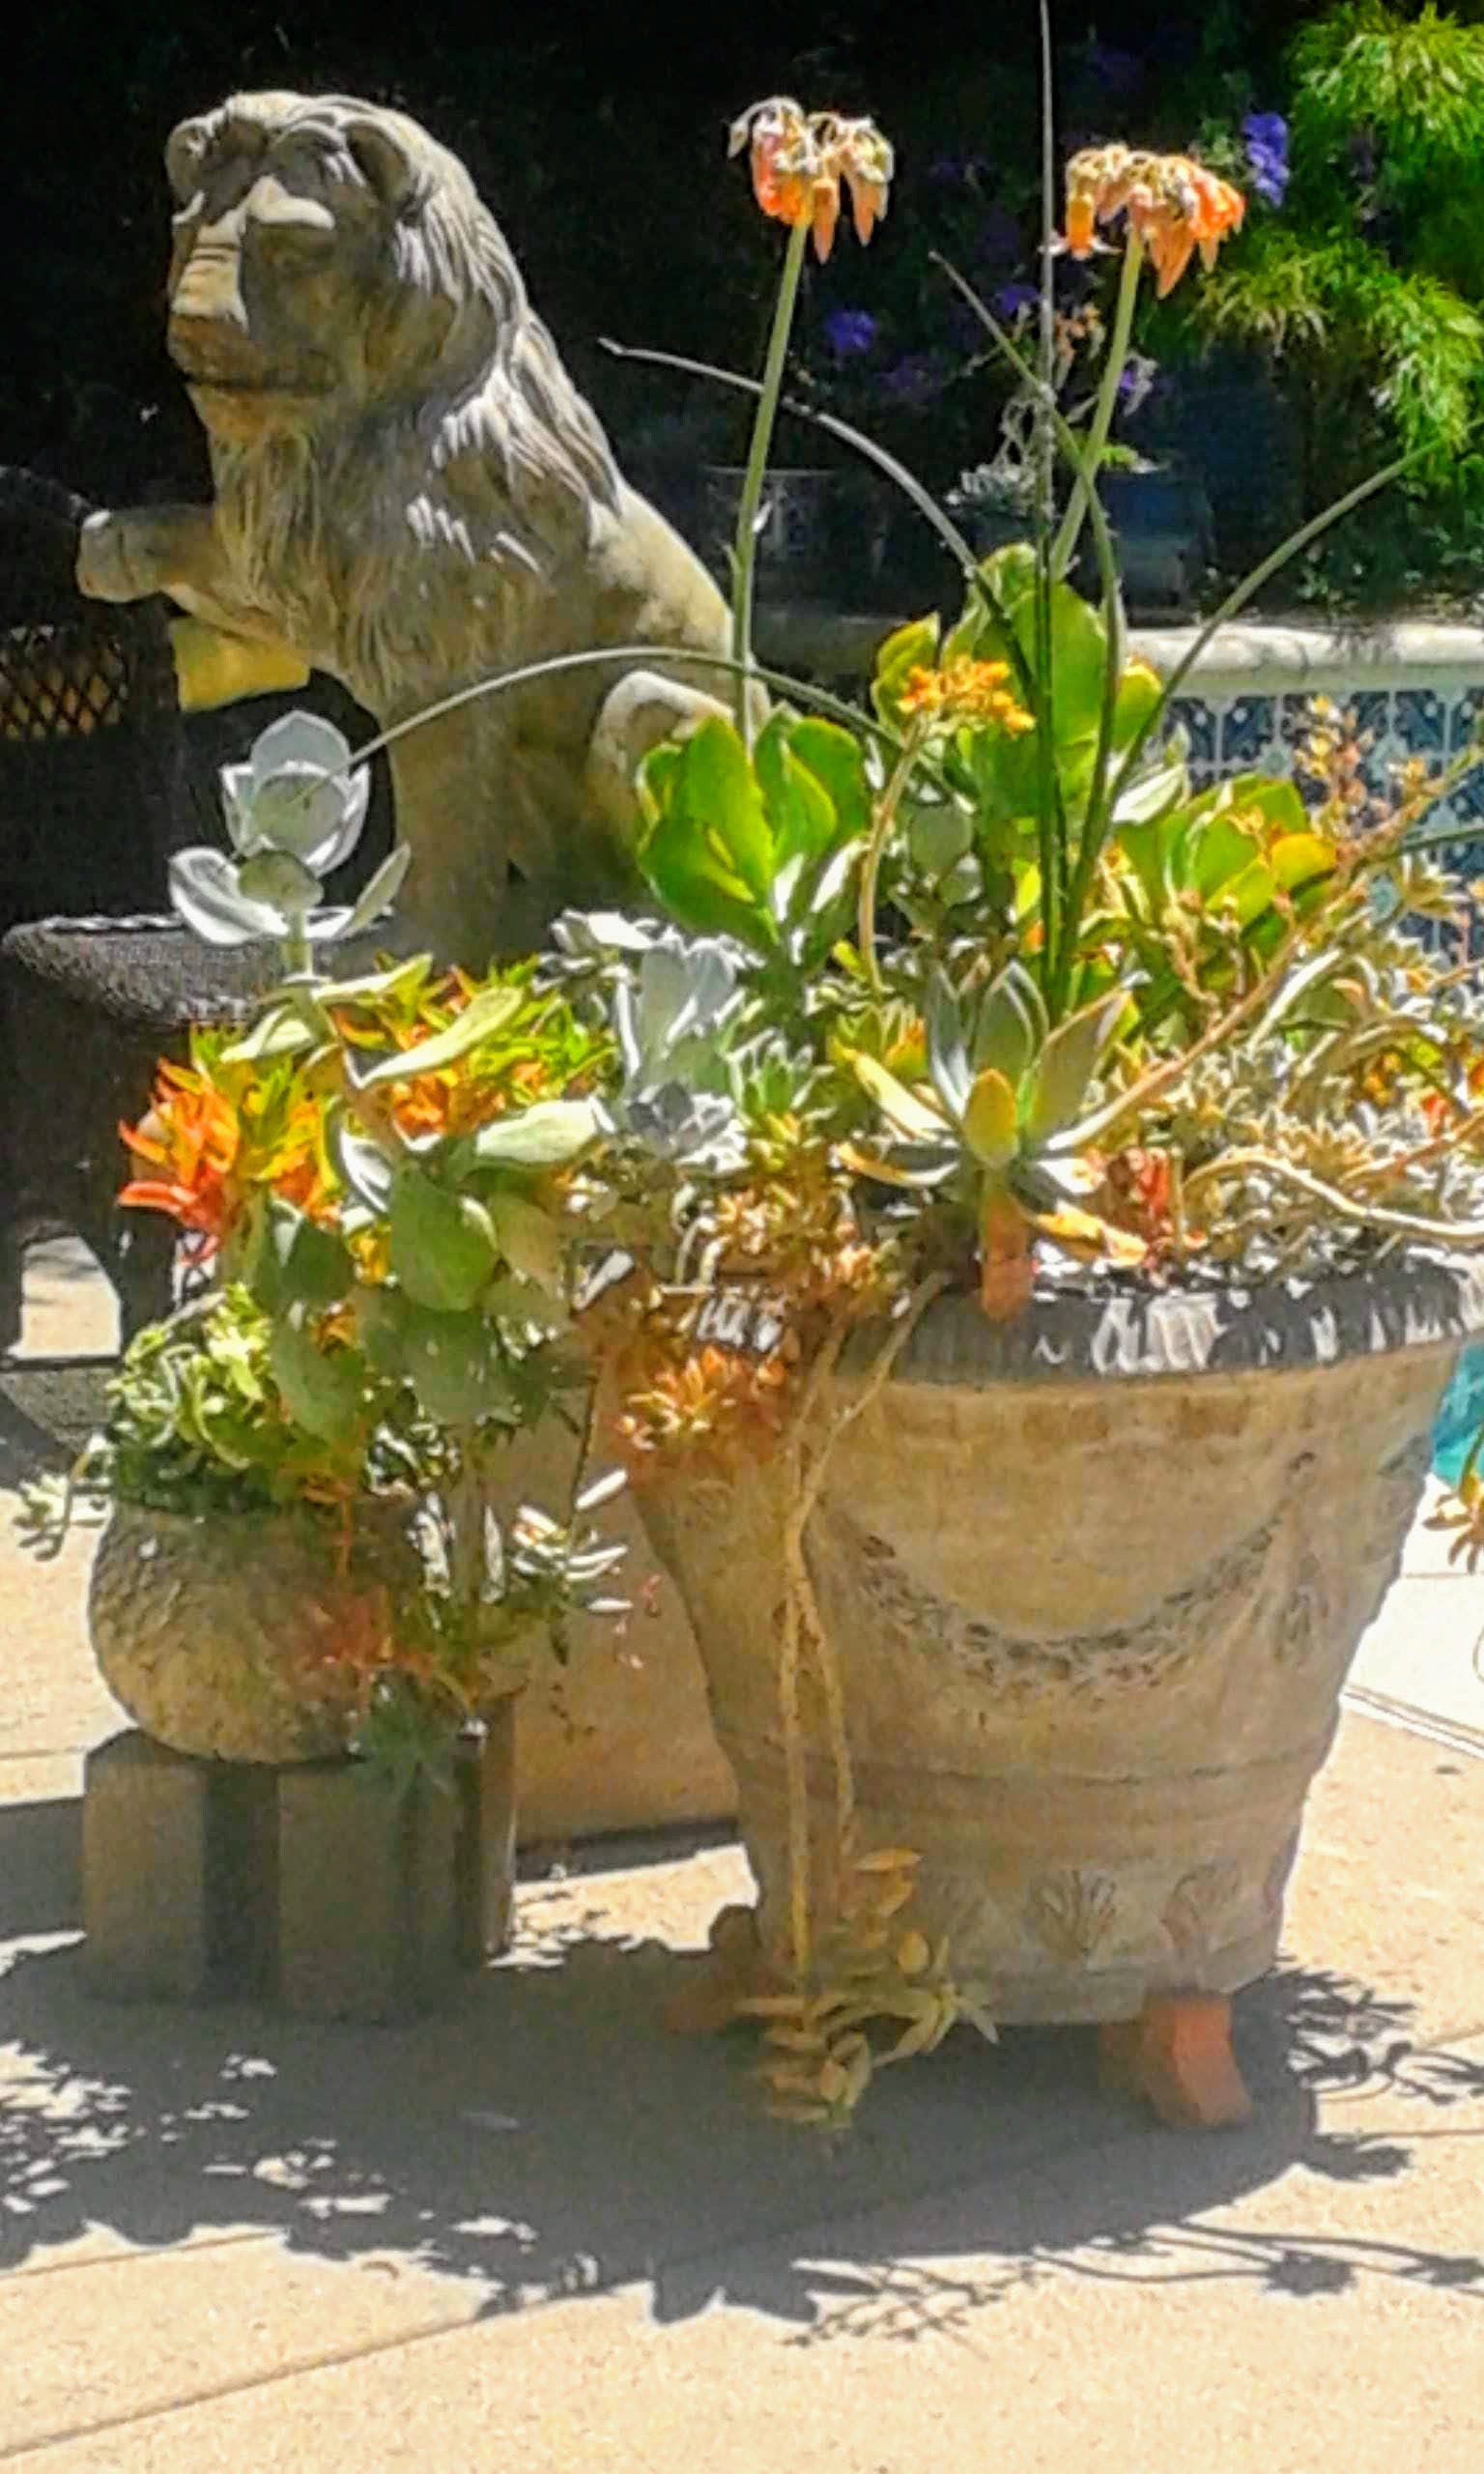 Randy's poolside succulent container garden on 2018-6-26-EFFECTS.jpg